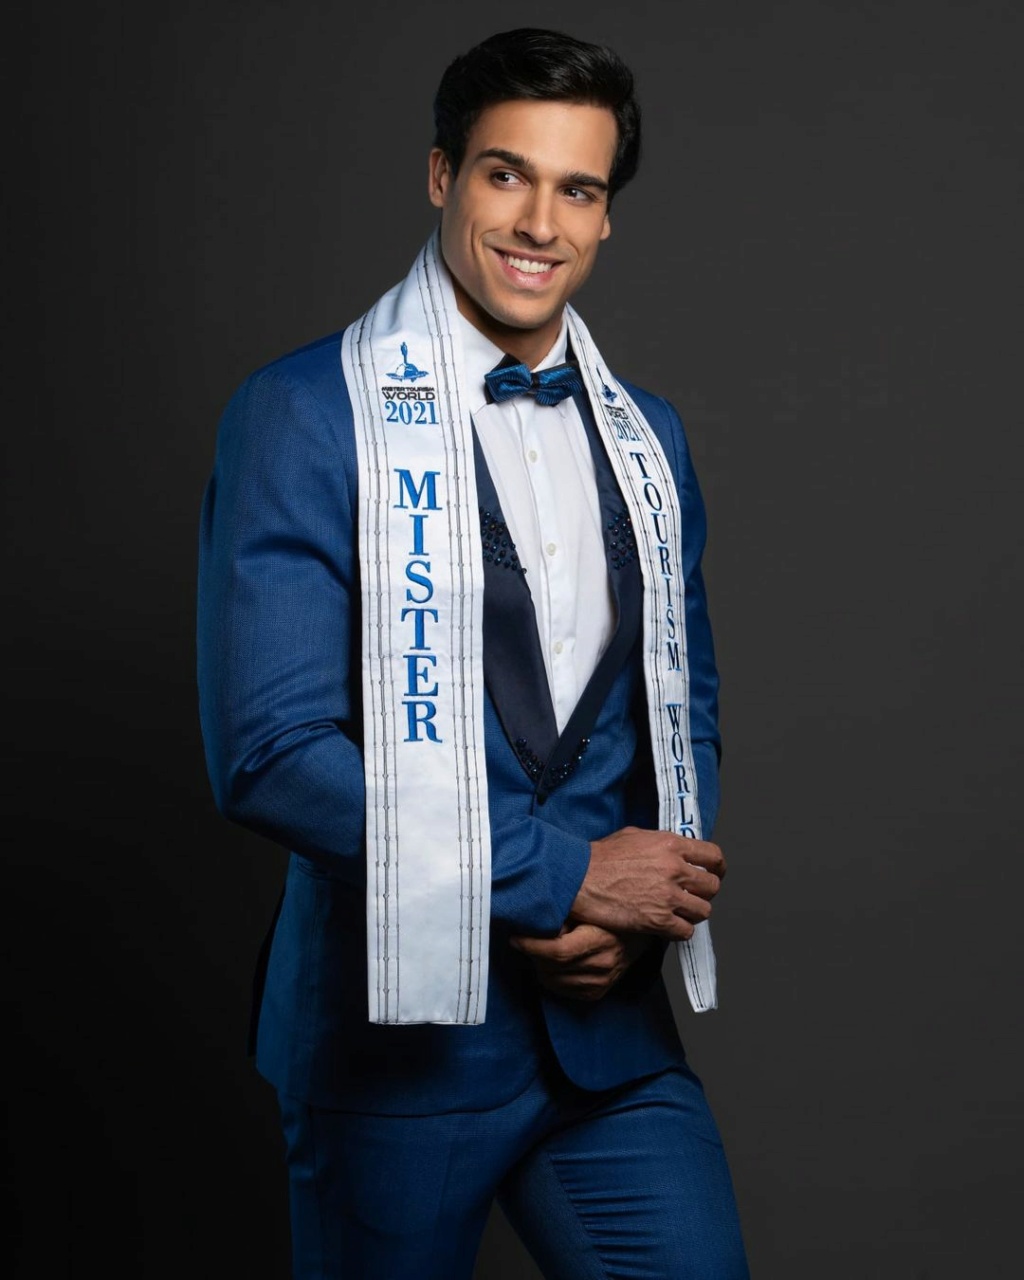 Official Thread of Mister Tourism World 2020/2021 is Jonathan Checo of Dominican Republic 27007710